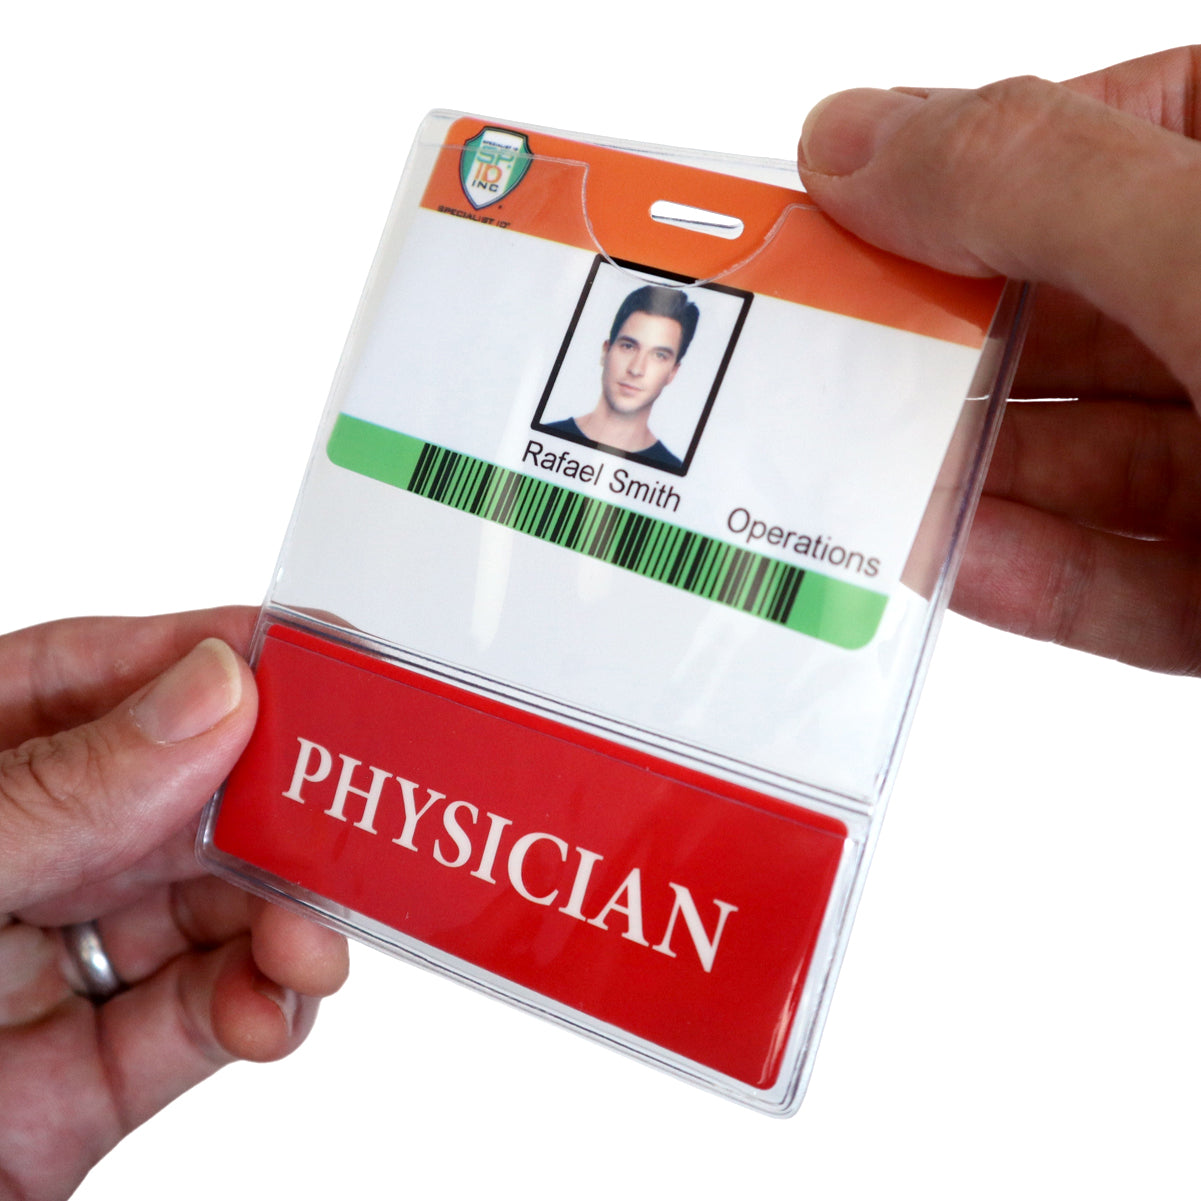 PHYSICIAN BadgeBottom Badge Holder & PHYSICIAN Badge Buddy IN ONE!! - Horizontal ID Badge Sleeve with Bottom Role Tag for Nurses